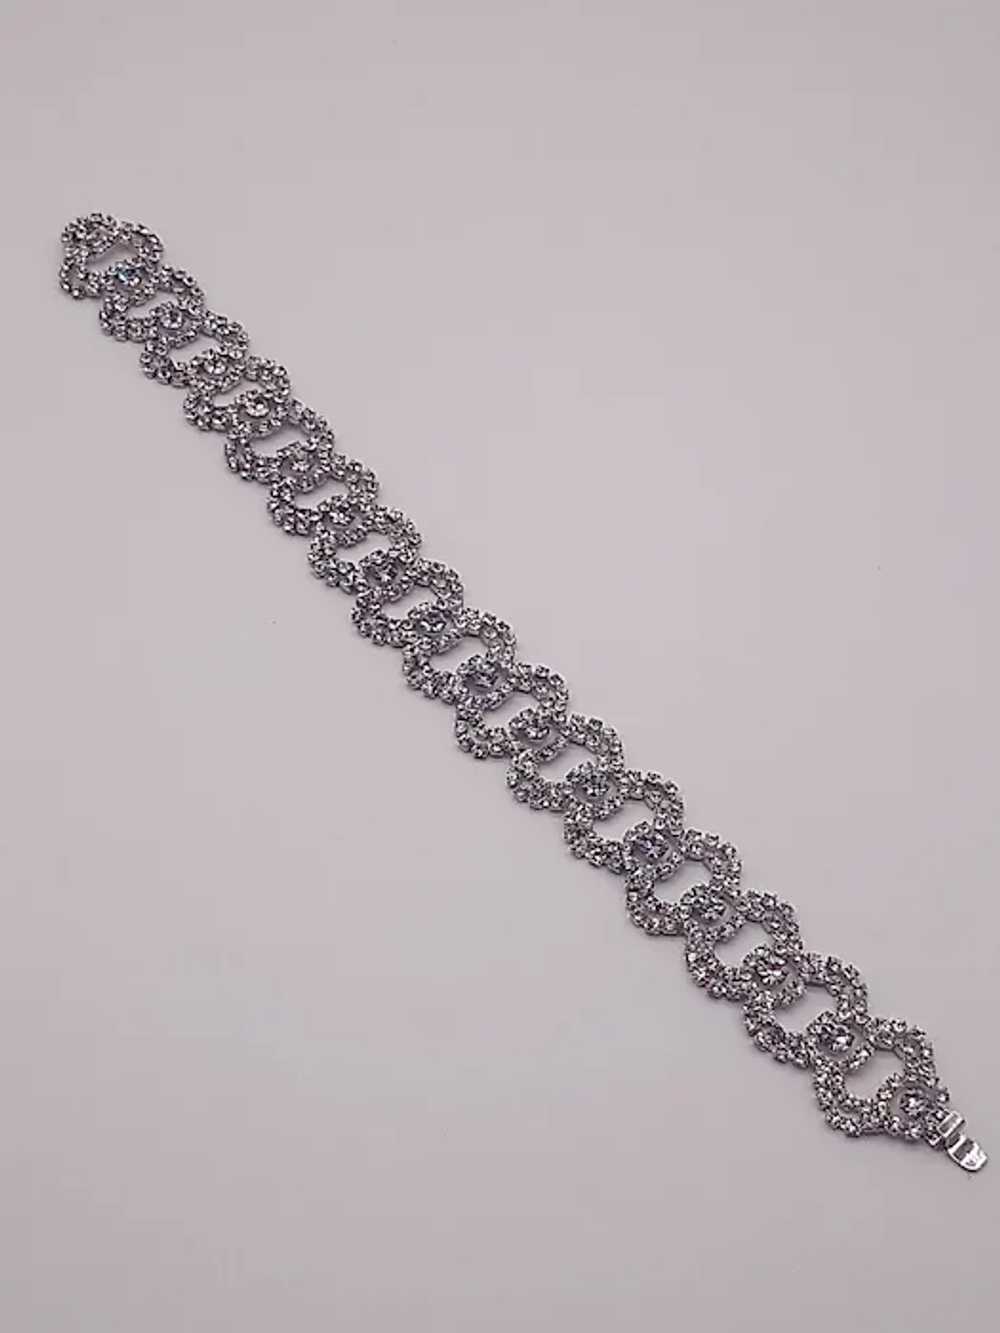 Vintage clear silver tone chocker necklace - image 9